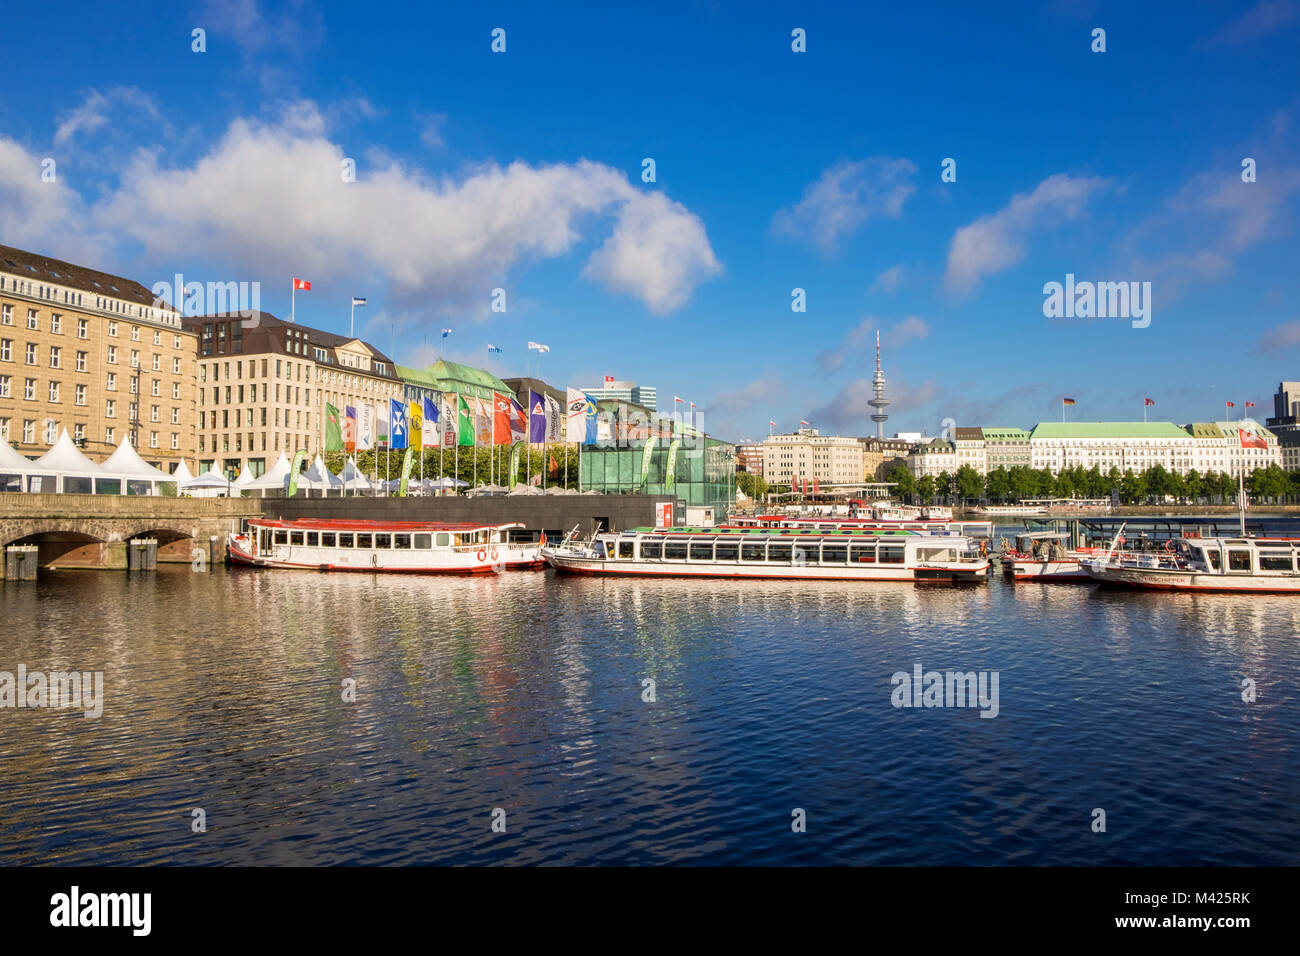 Alster Lake with pleasure cruise boats, in central Hamburg, Germany Stock Photo